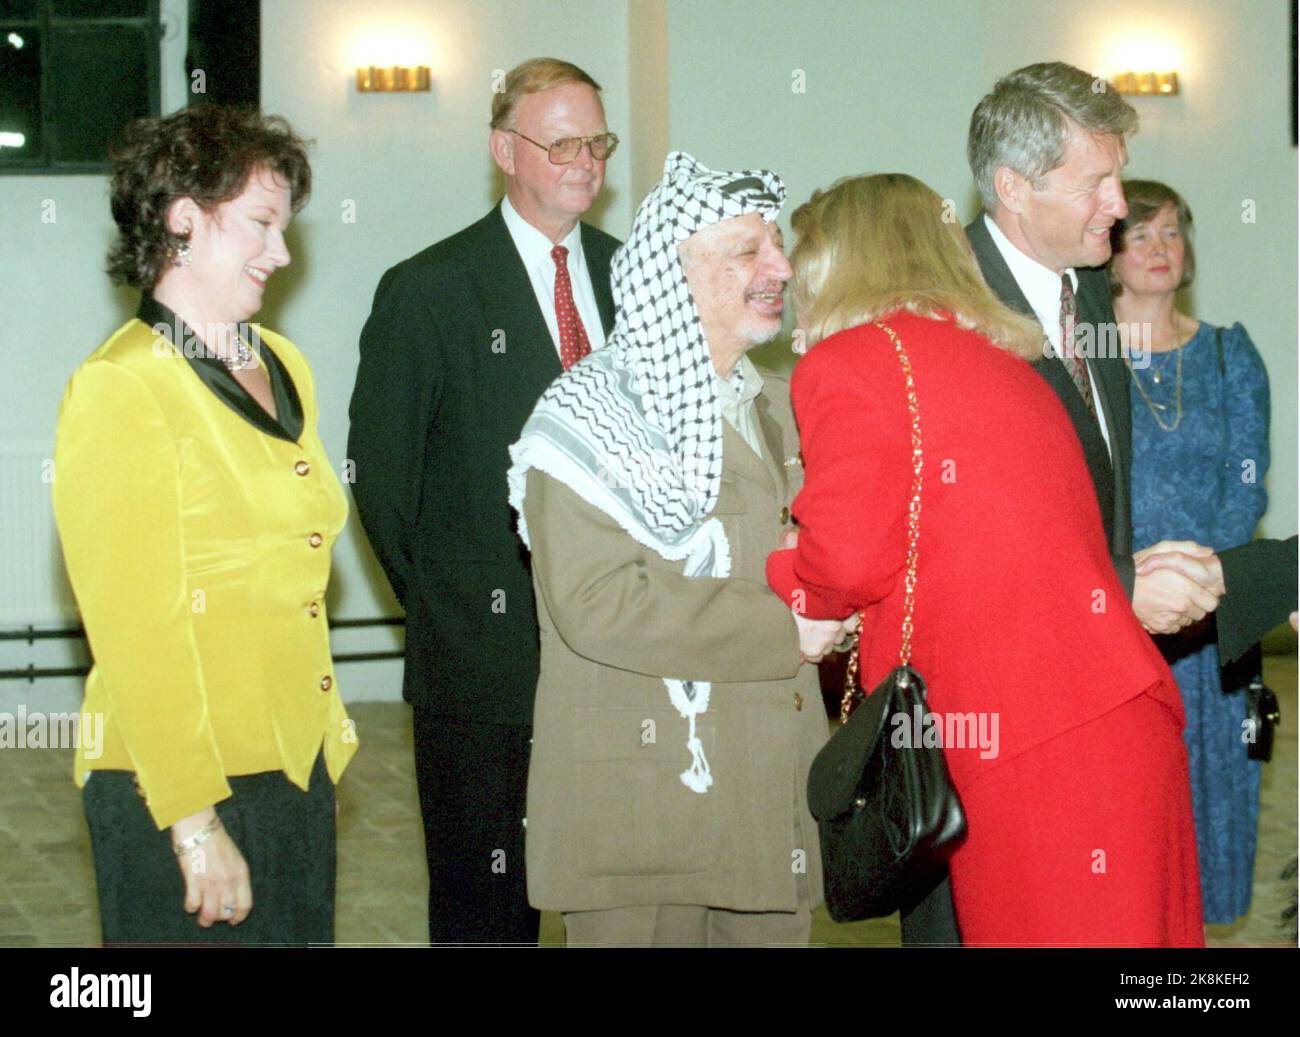 Oslo. 19961028. Palestinians President Yasser Arafat on an official visit to Norway.Yasser Arafat at dinner at Akershus Fortress, here with Prime Minister Thorbjørn Jagland and Jagland's wife Hanne Grotjord. It was Grotjord's first representation assignment after her husband became prime minister. Arafat greets the guests here, including Marianne Heiberg, widow of former Foreign Minister Johan Jørgen Holst. Photo: Tor Richardsen  - - The picture is about 6 MB - - - Stock Photo